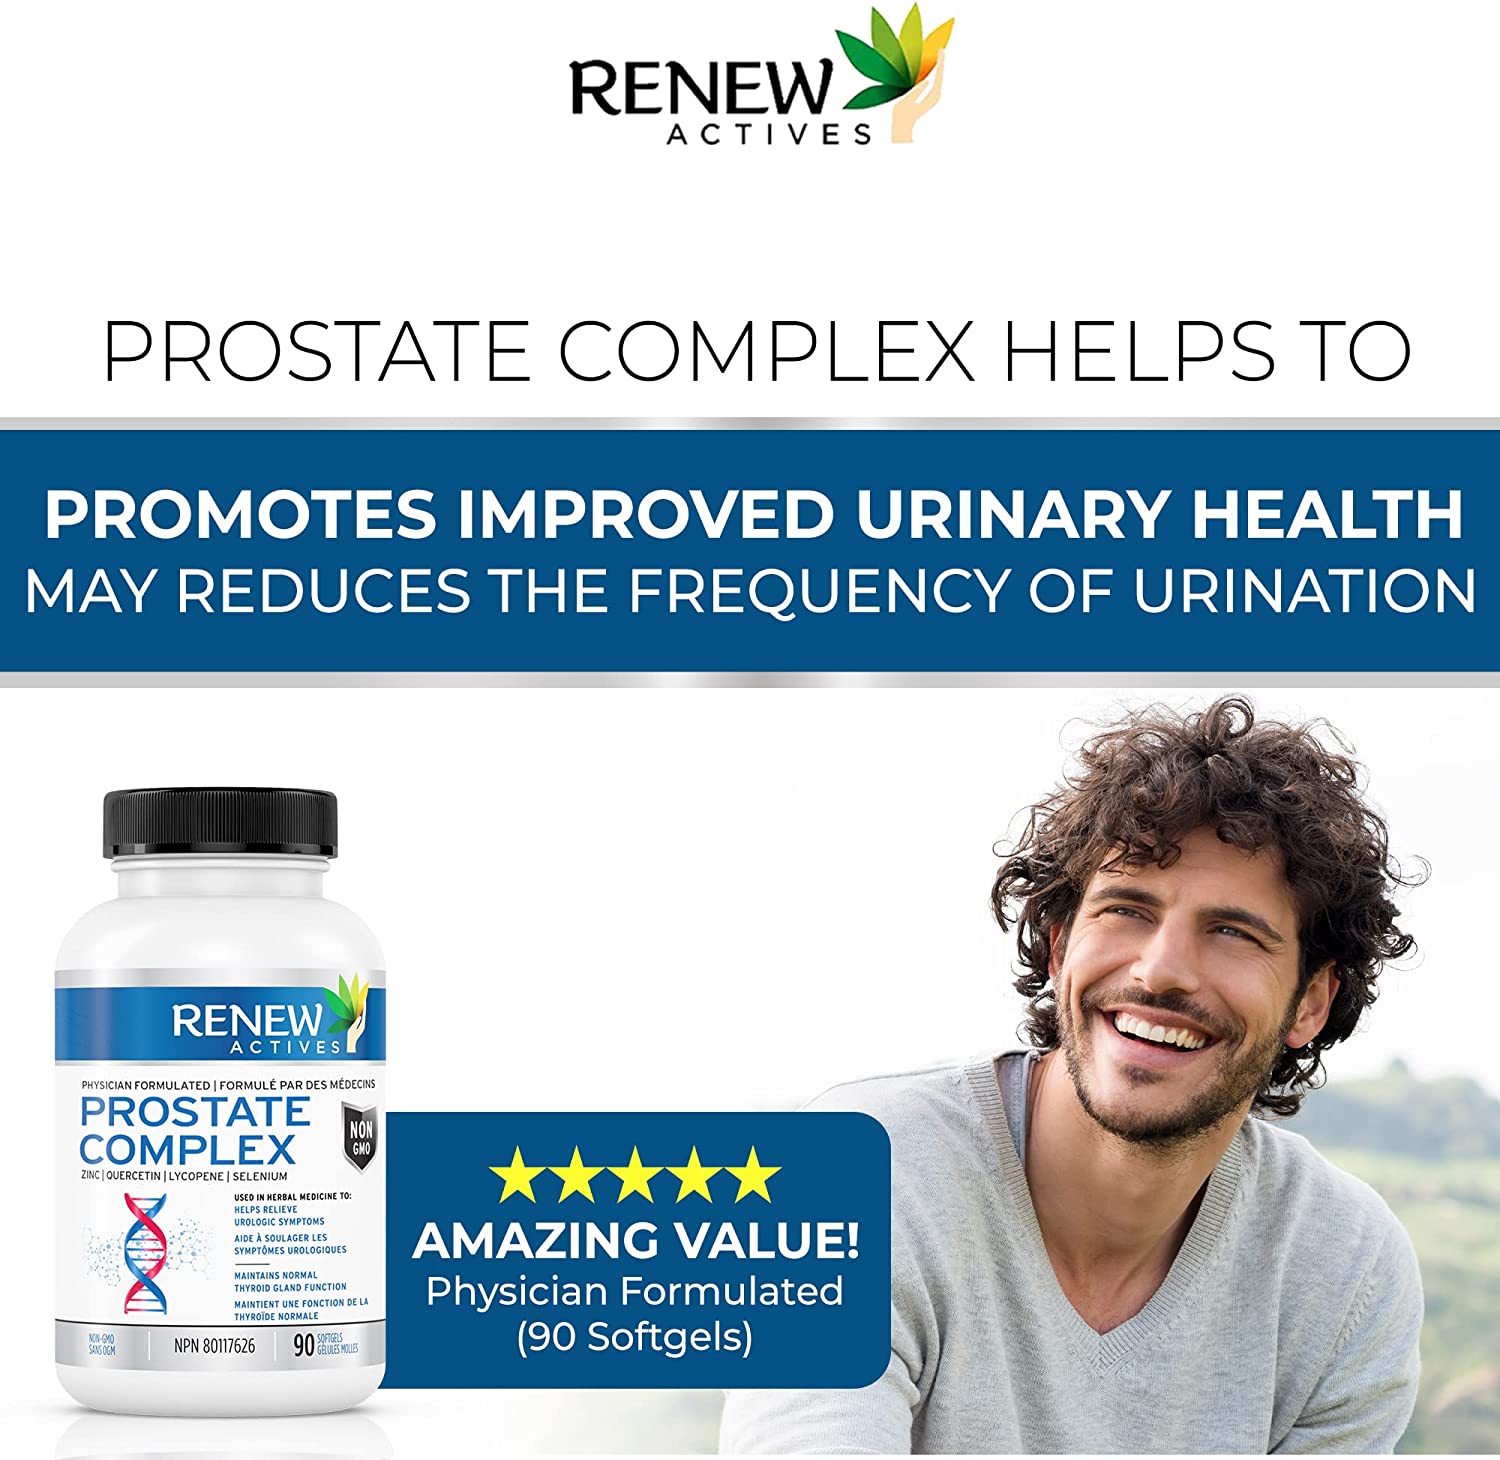 Renew Actives Prostate Complex with Saw Palmetto - 90 Count